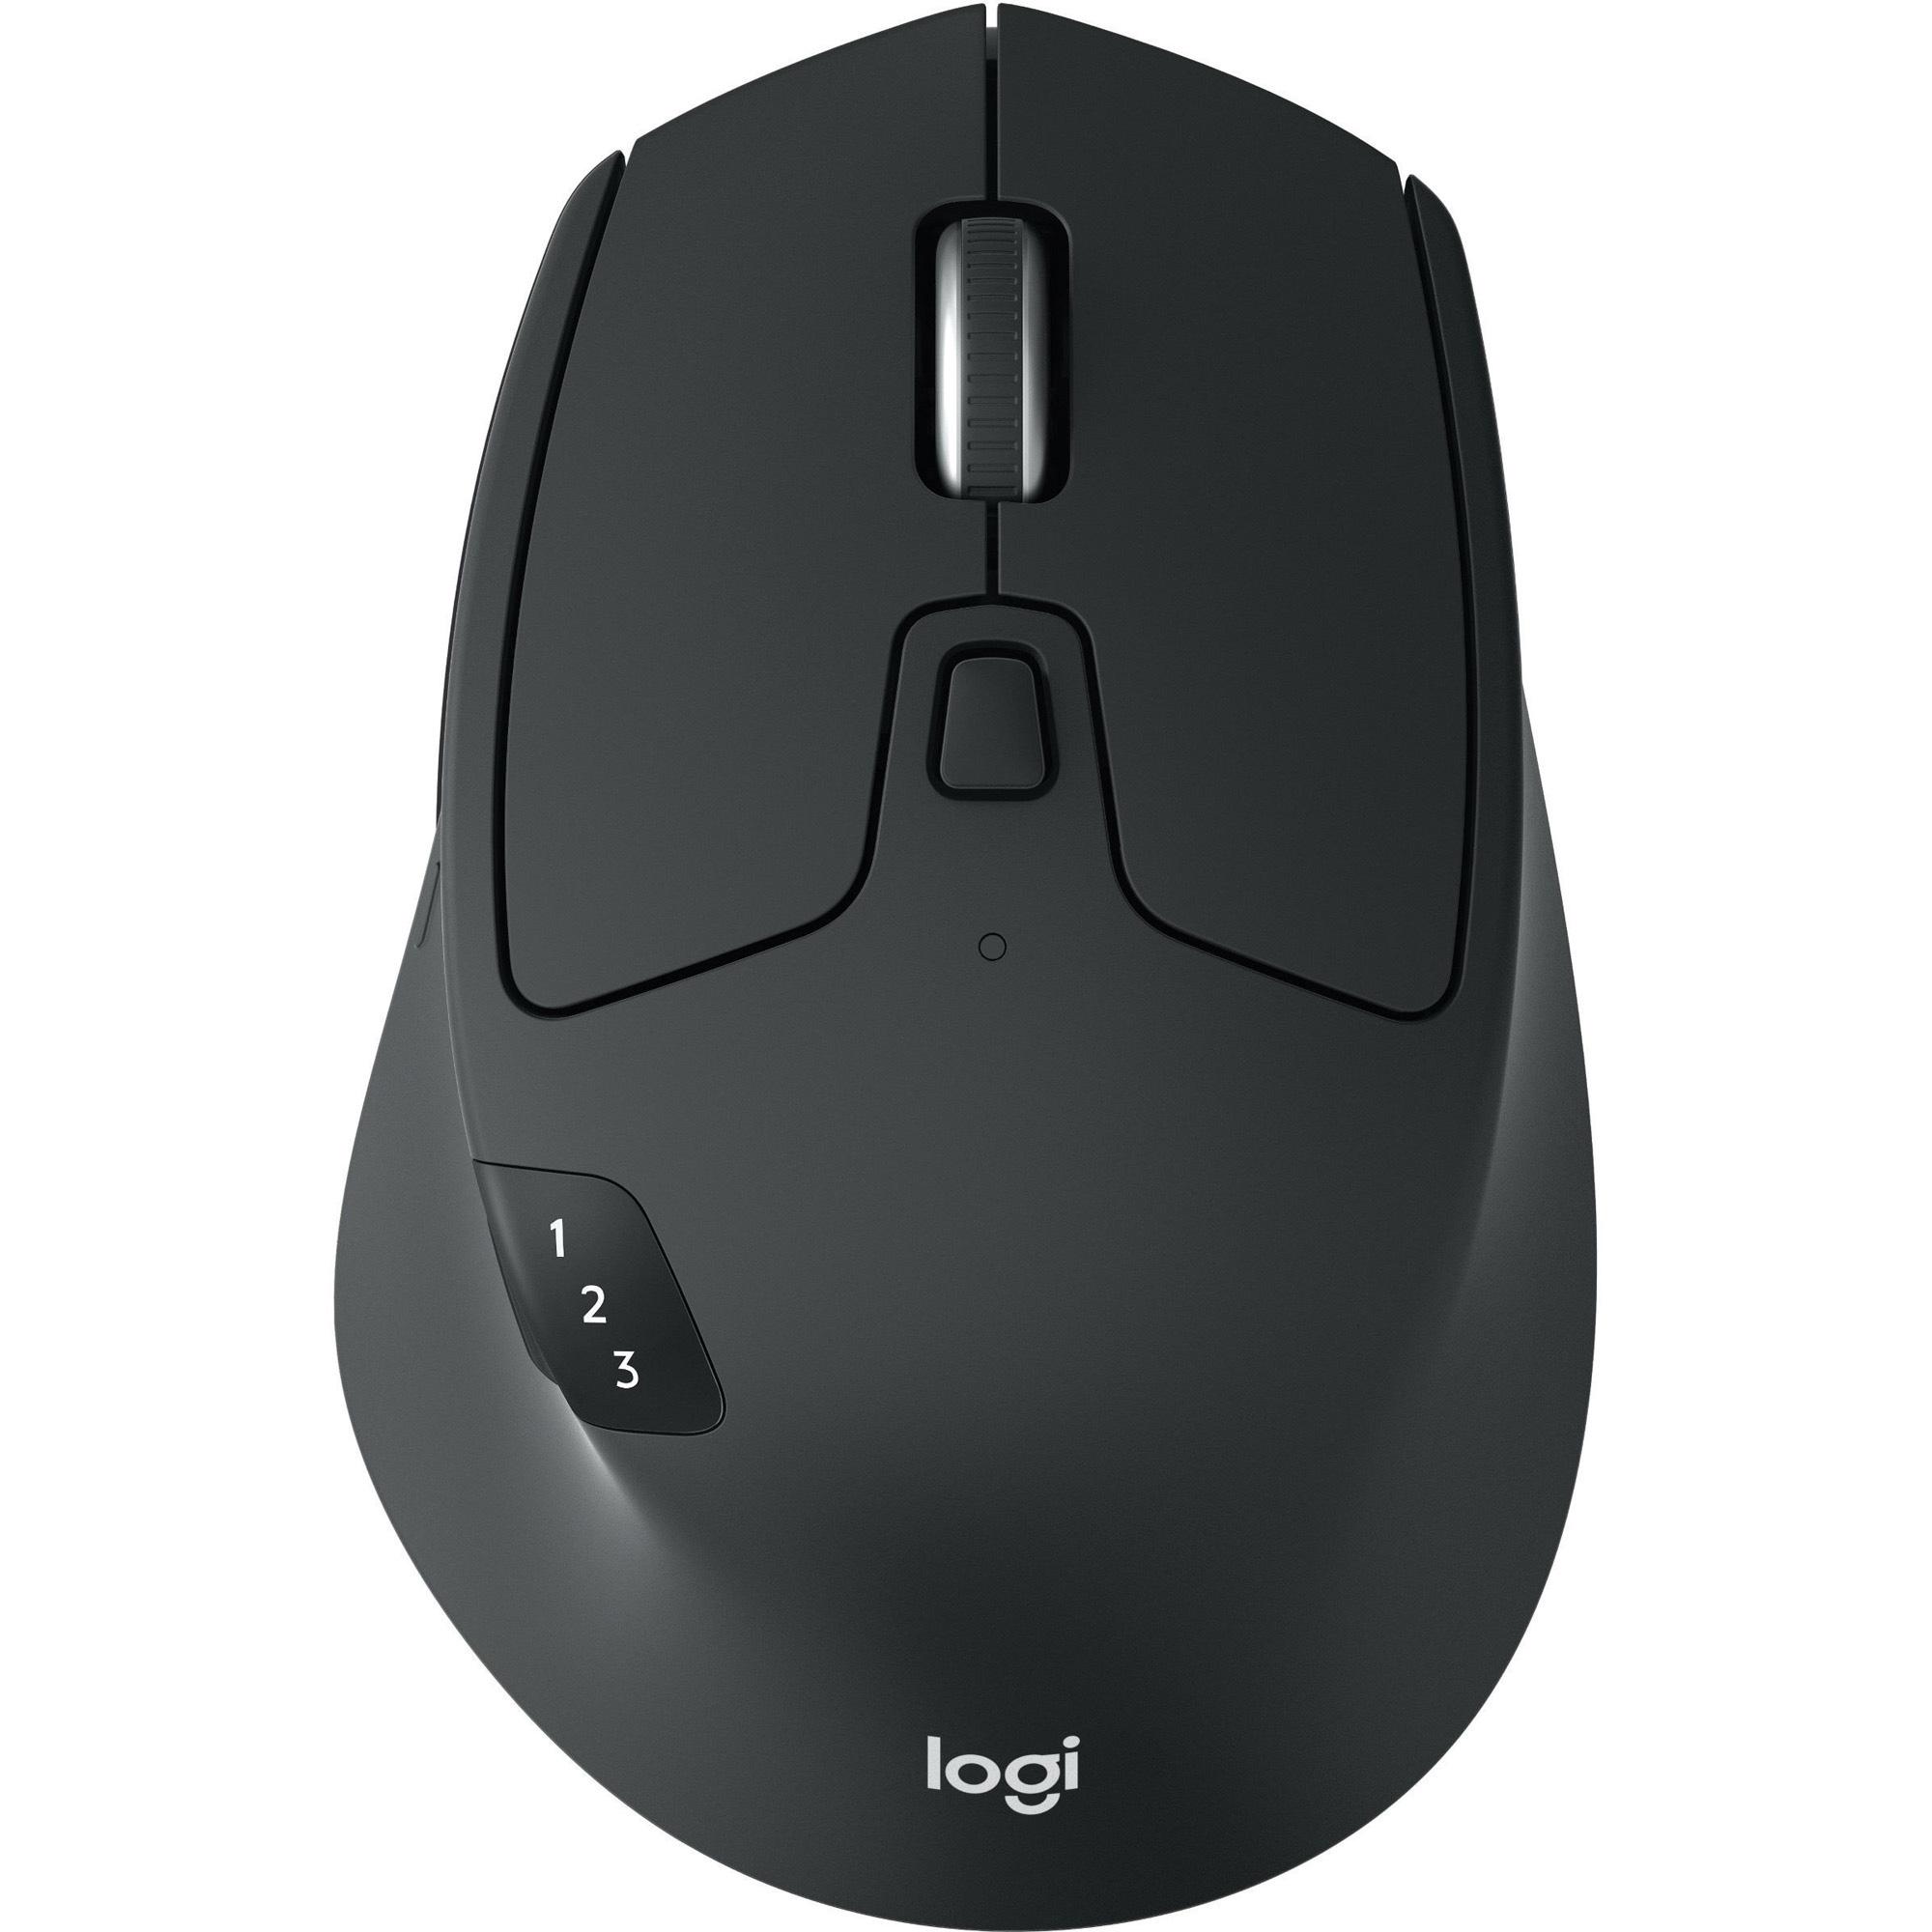 LOGITECH M720 TRIATHALON BLUETOOTH OR USB MOUSE - Dartmouth The Computer  Store